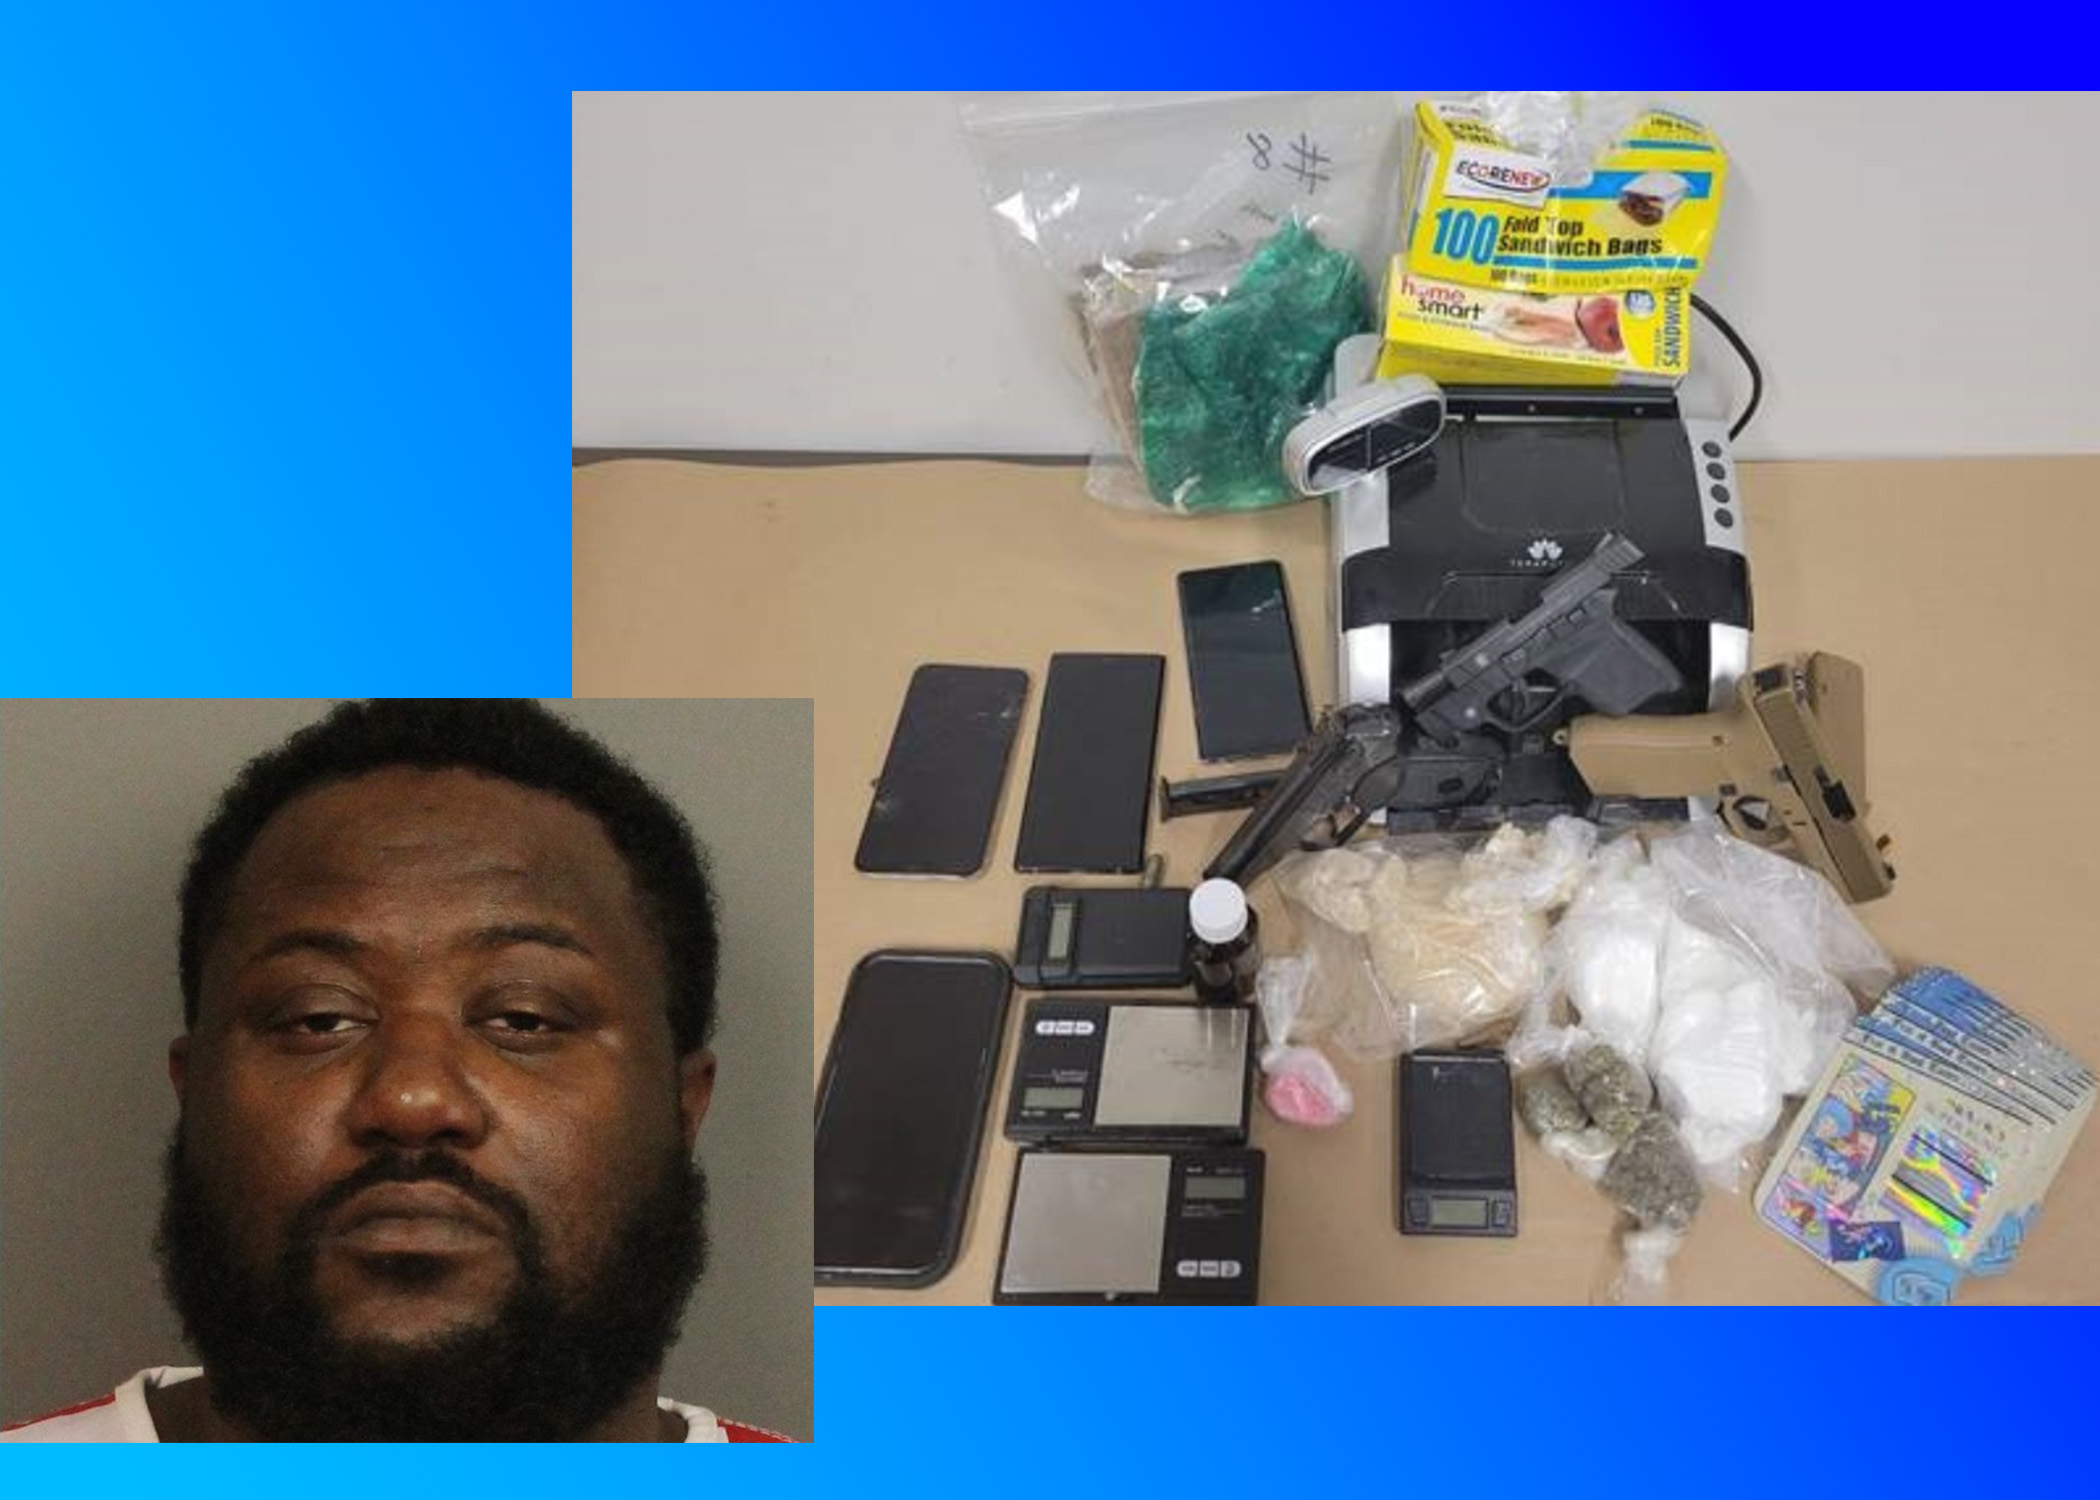 Drug search warrant yields over 500 grams of cocaine, other narcotics in Fultondale